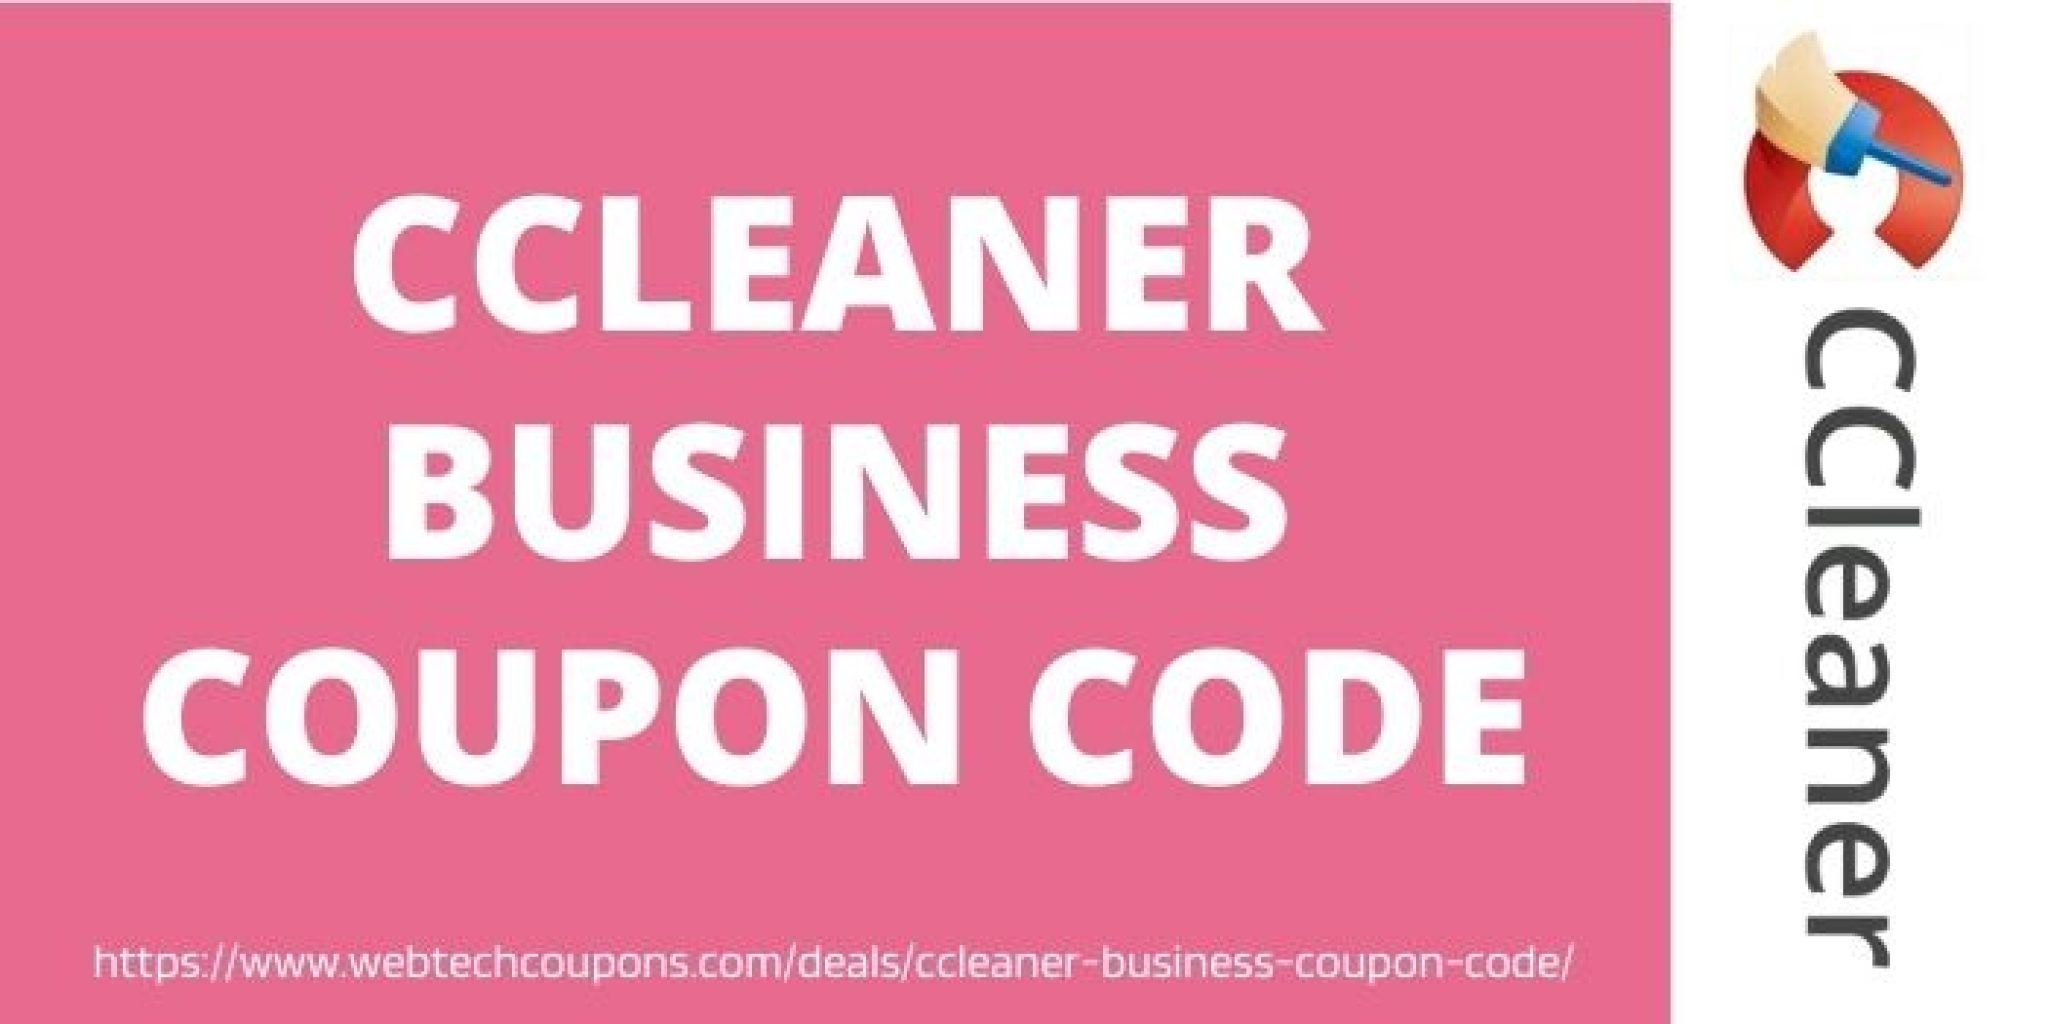 ccleaner coupon code